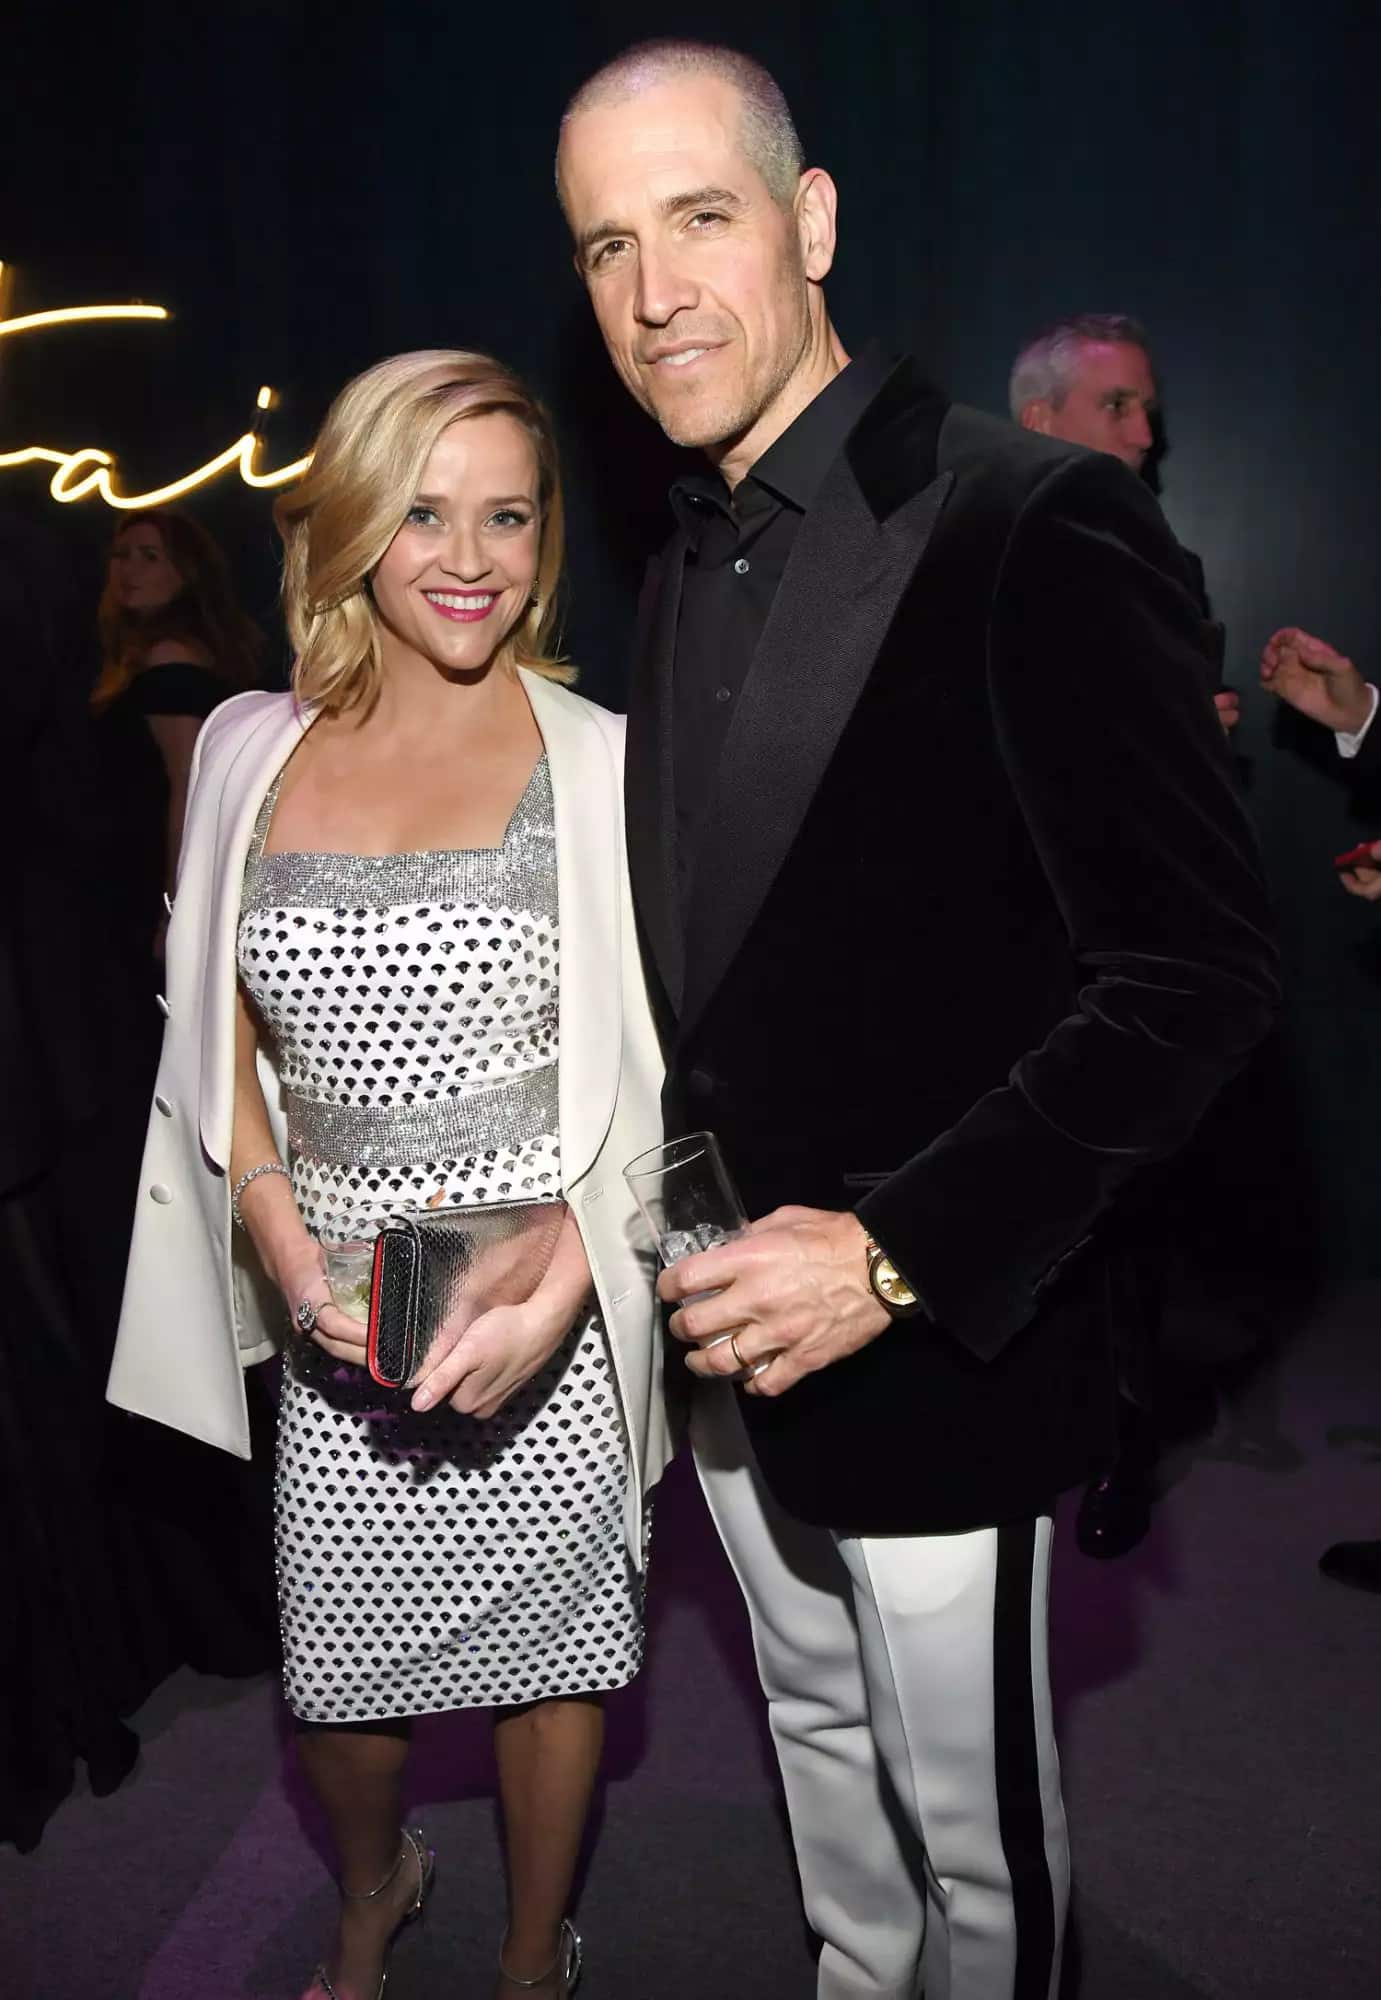 Reese Witherspoon Announces Divorce from Jim Toth